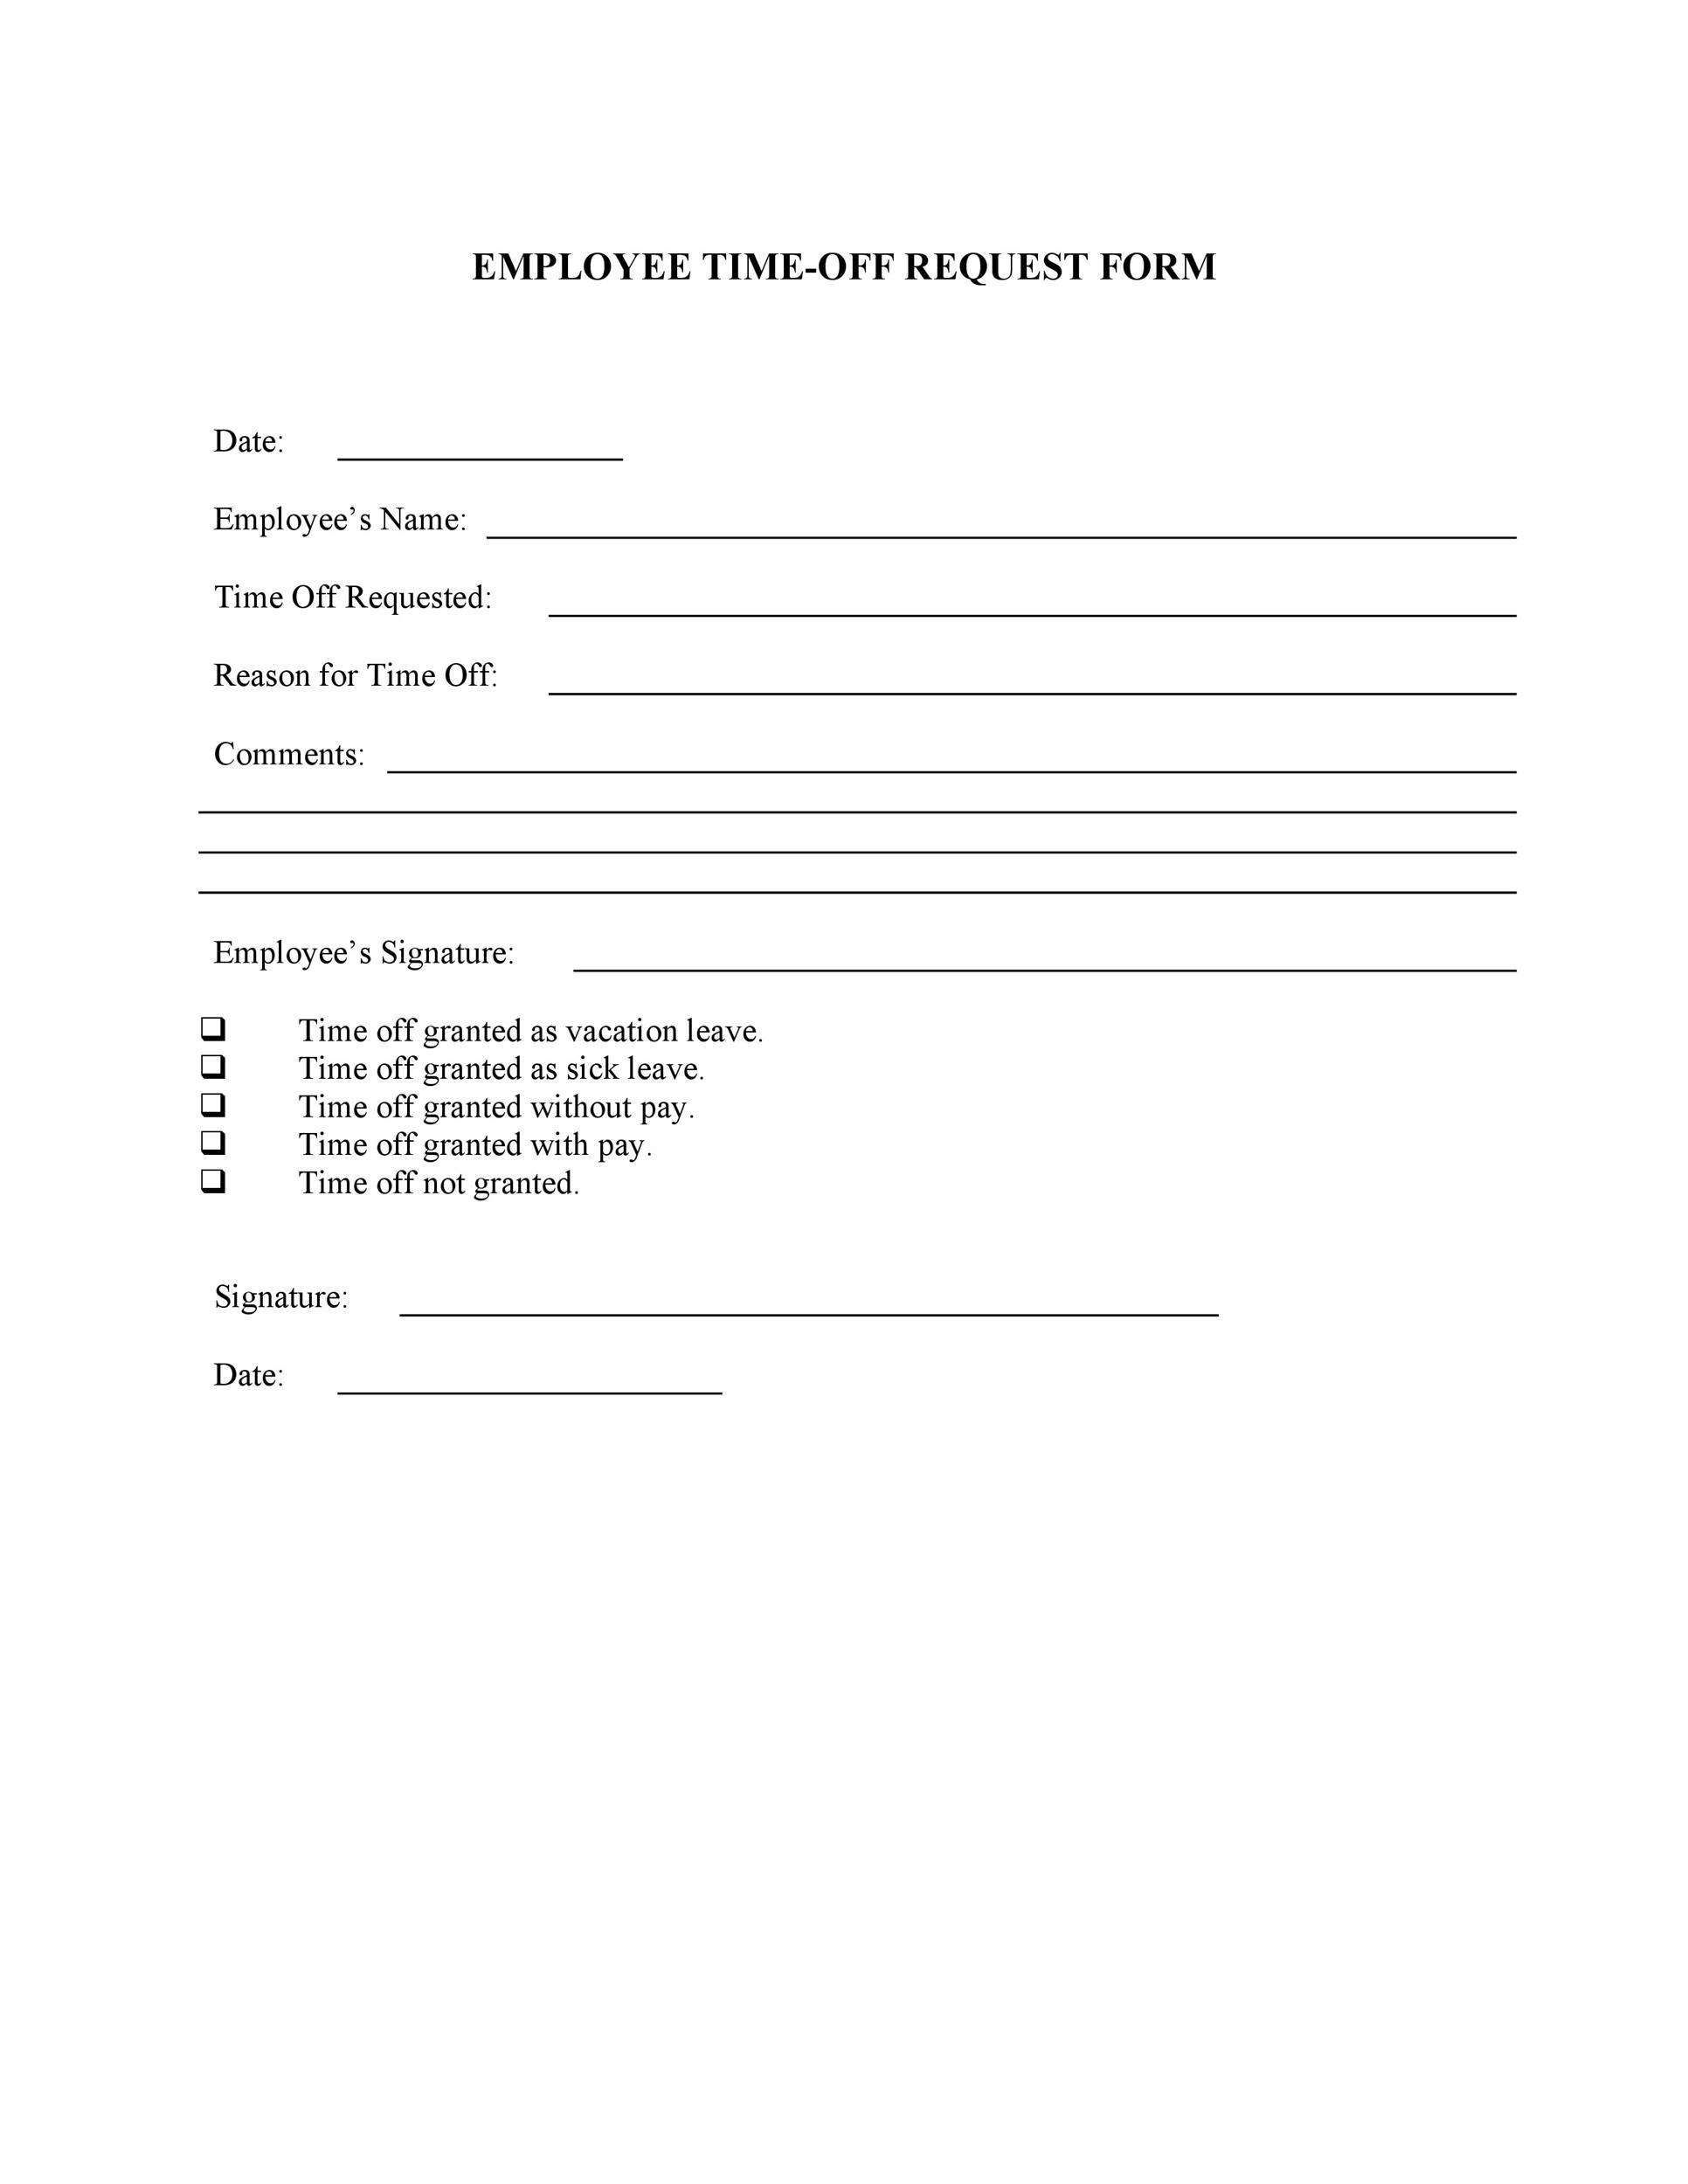 Free time off request form template 01